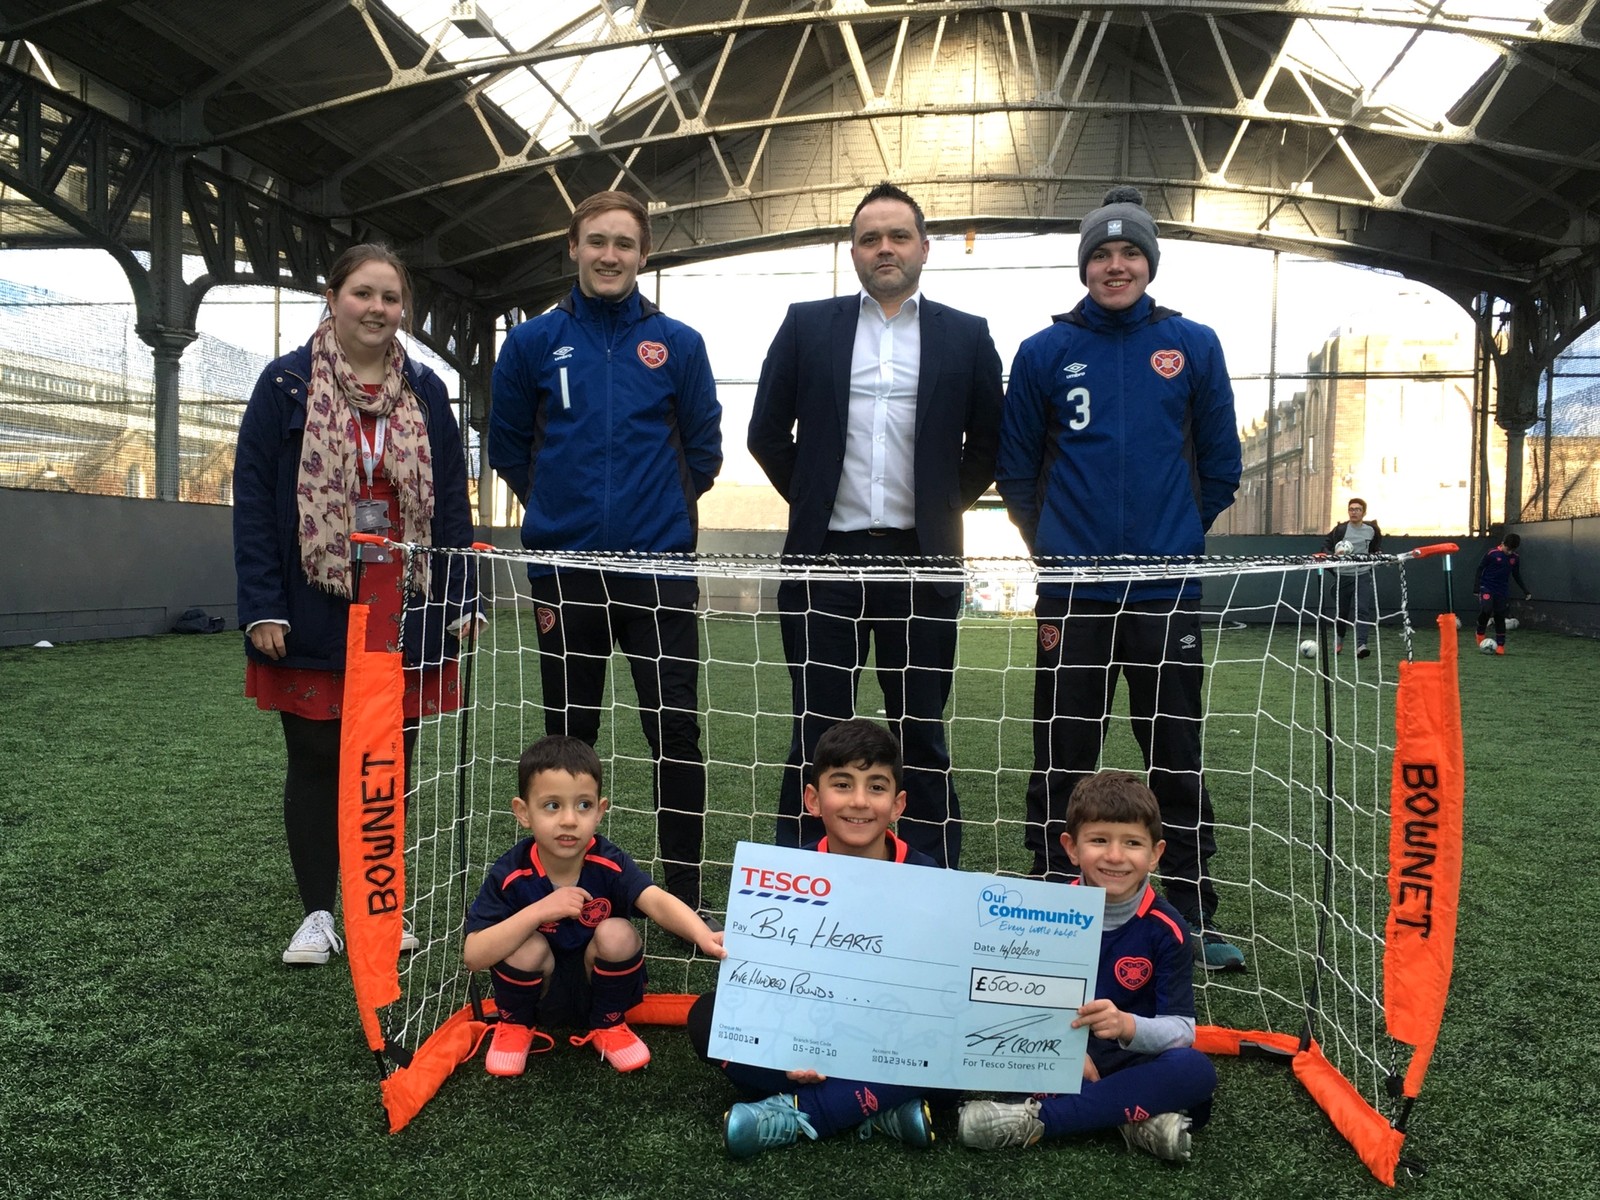  » More children accessing football holiday courses through Big Hearts!